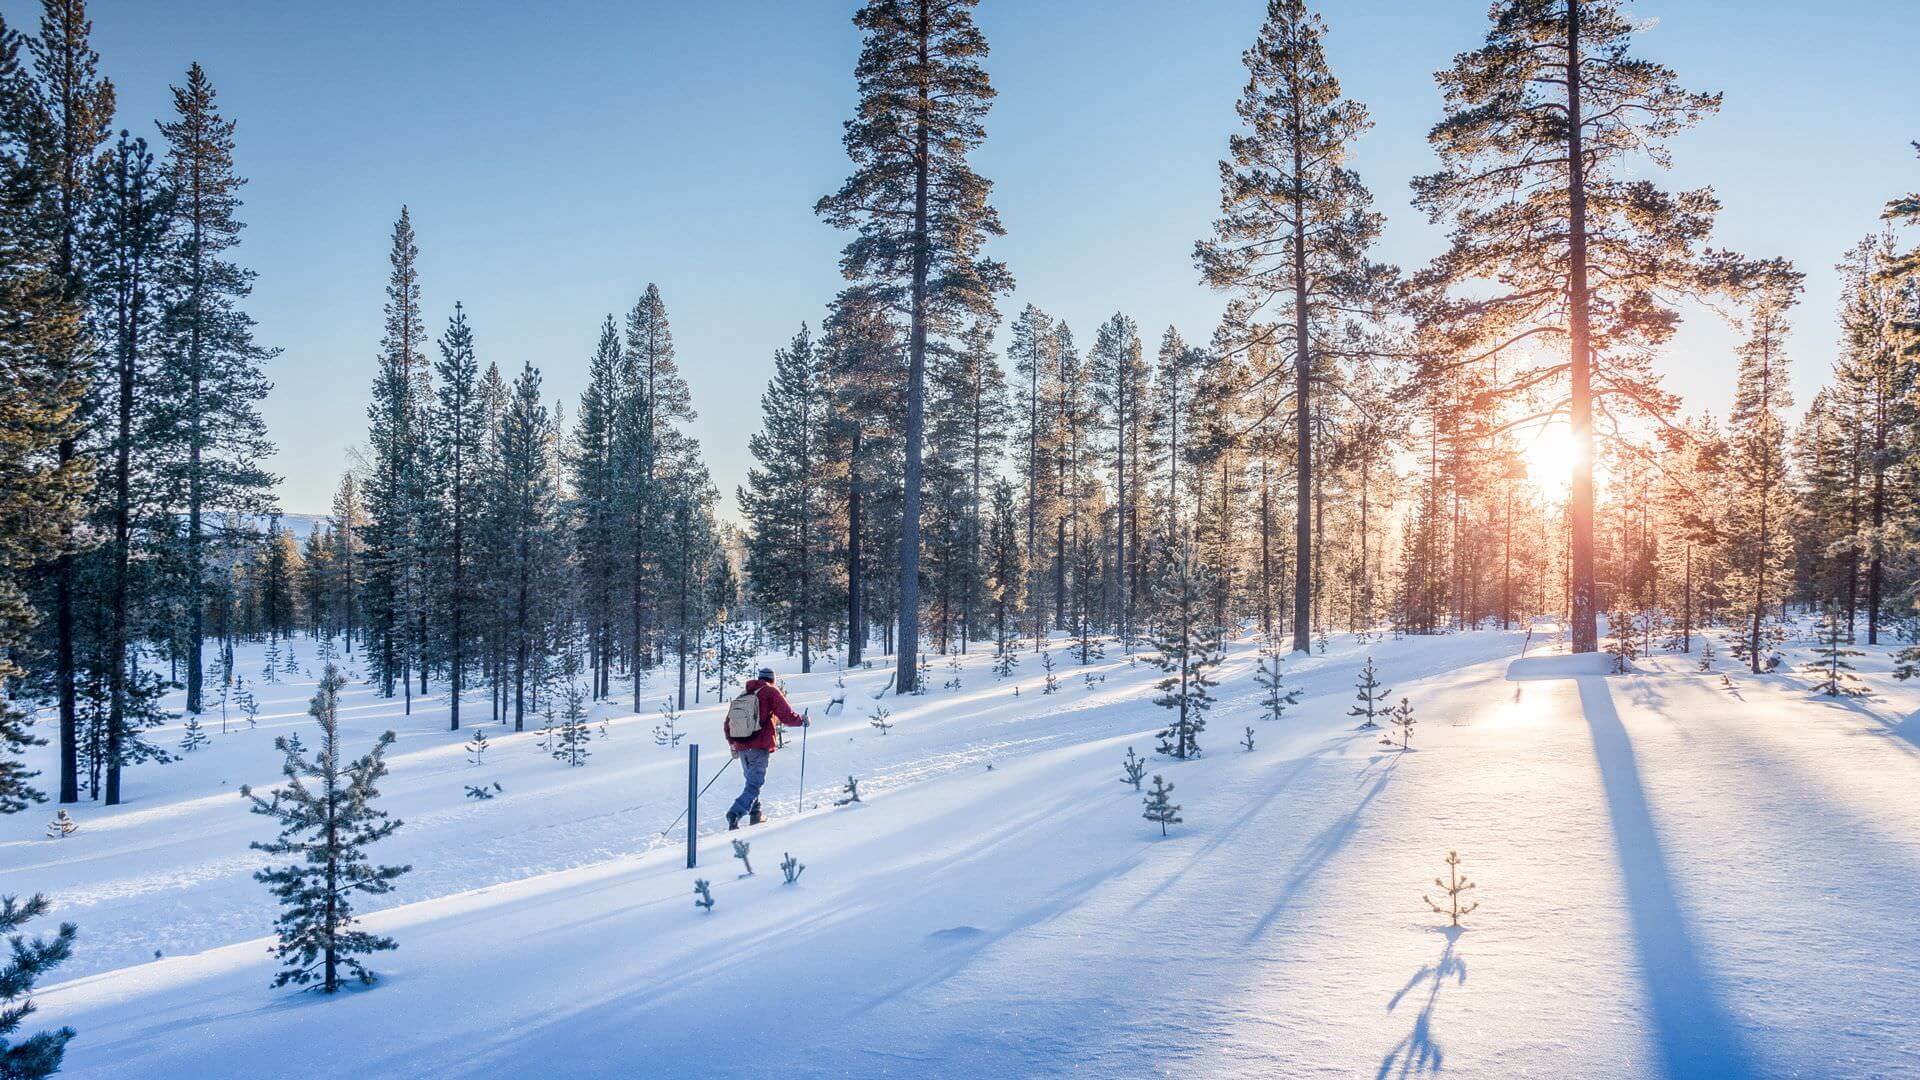 Skier between the trees in front of the sunset